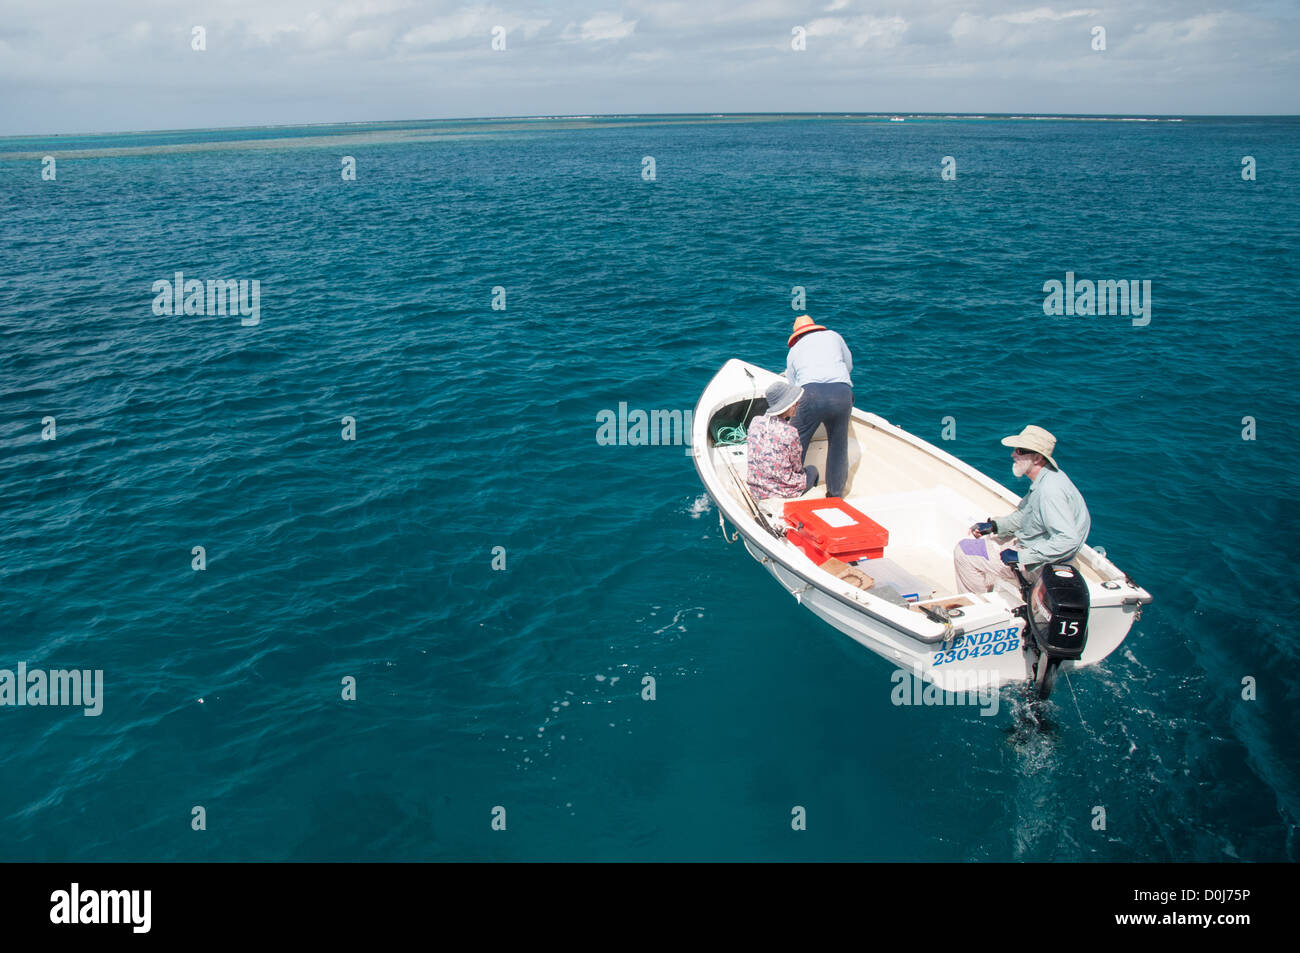 A small boat with three people heads out fishing on flat seas on Australia's Great Barrier Reef. Stock Photo